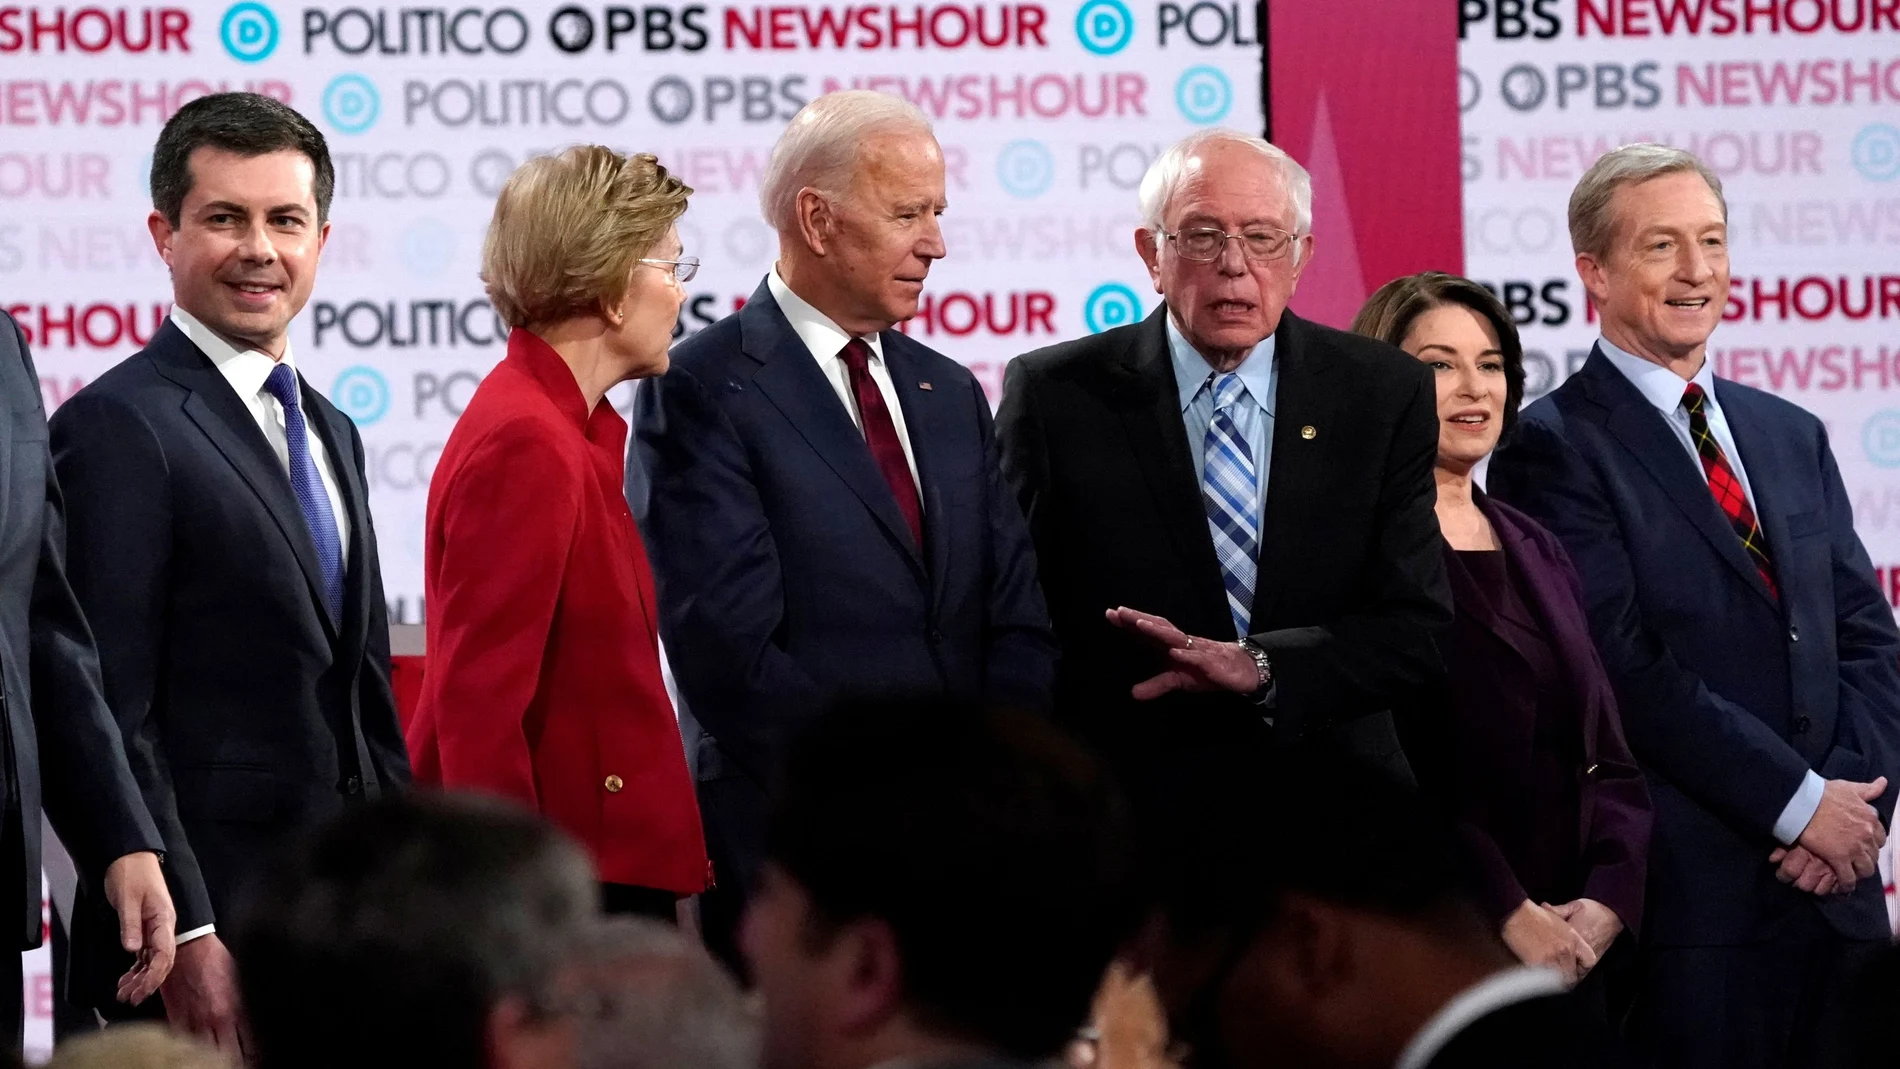 FILE PHOTO: Candidates on stage at the sixth 2020 U.S. Democratic presidential candidates campaign debate at Loyola Marymount University in Los Angeles, California, U.S.